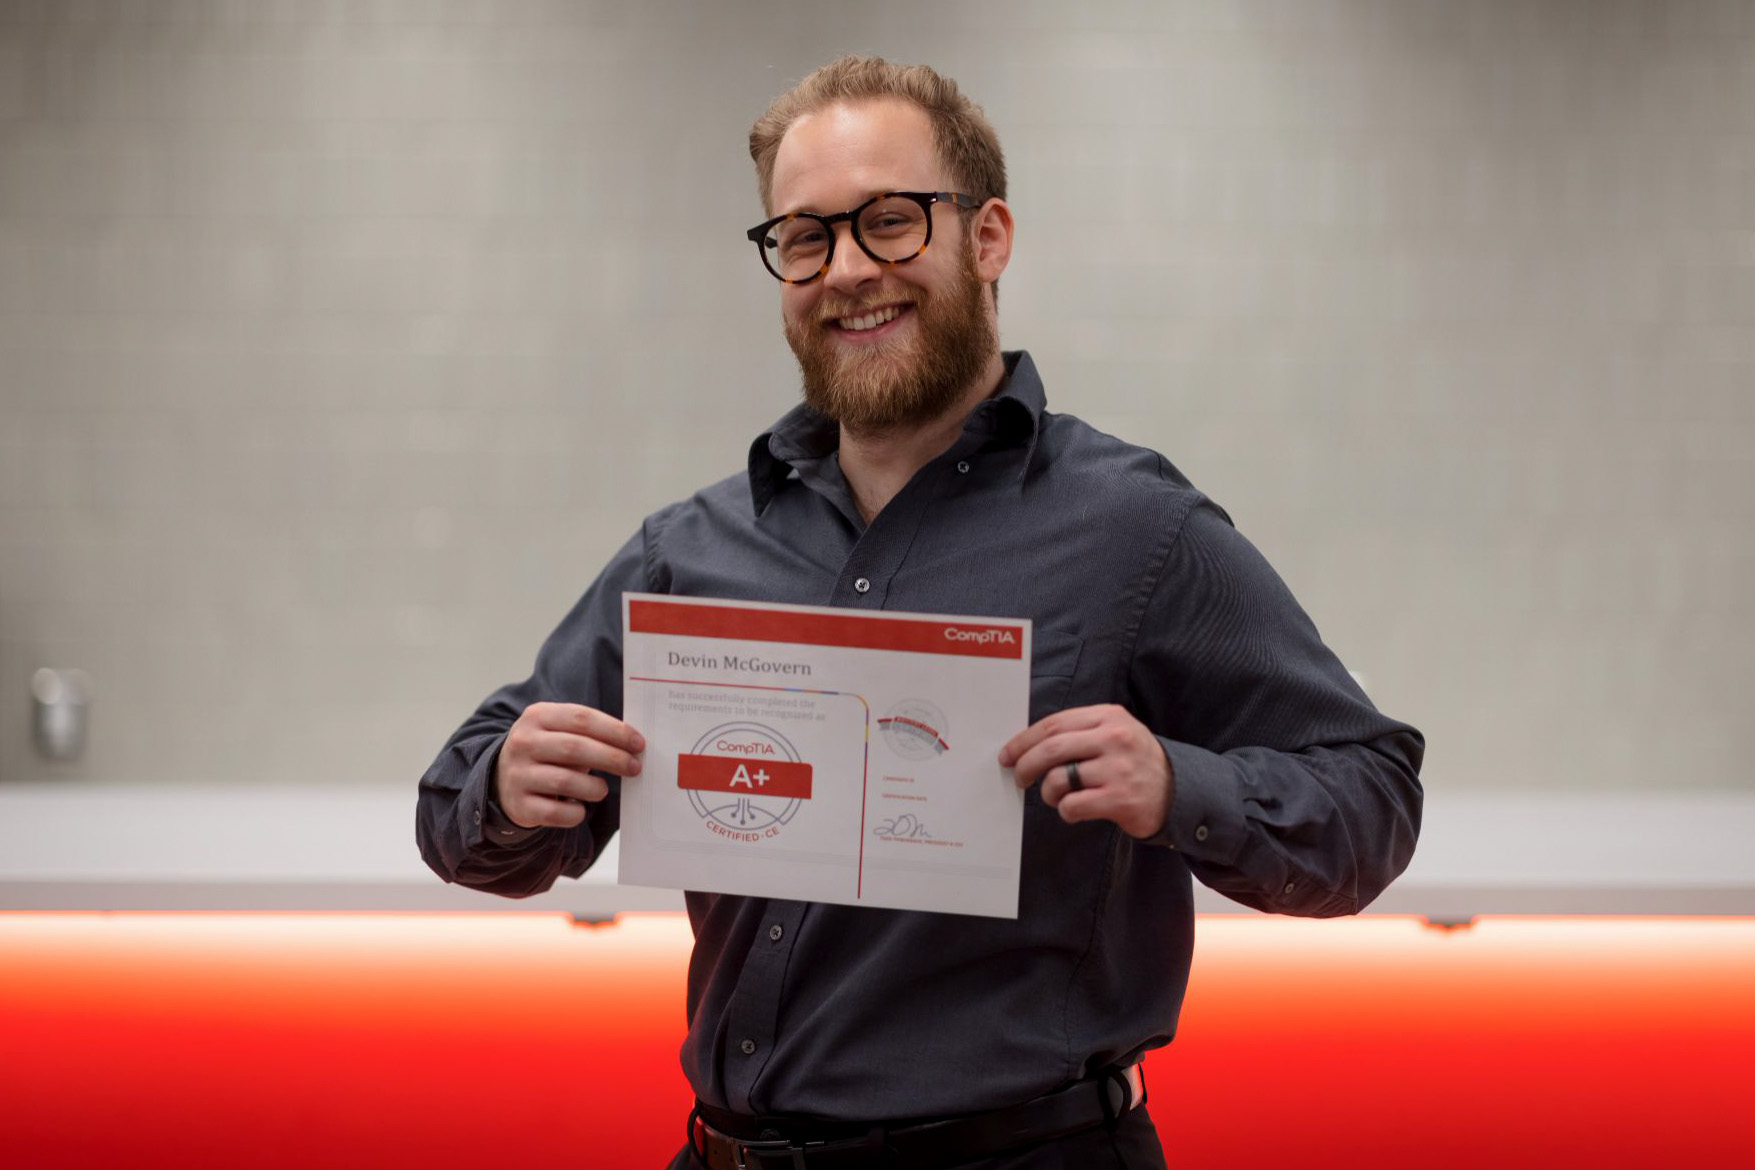 Devin McGovern holding his CompTIA+ Certificate